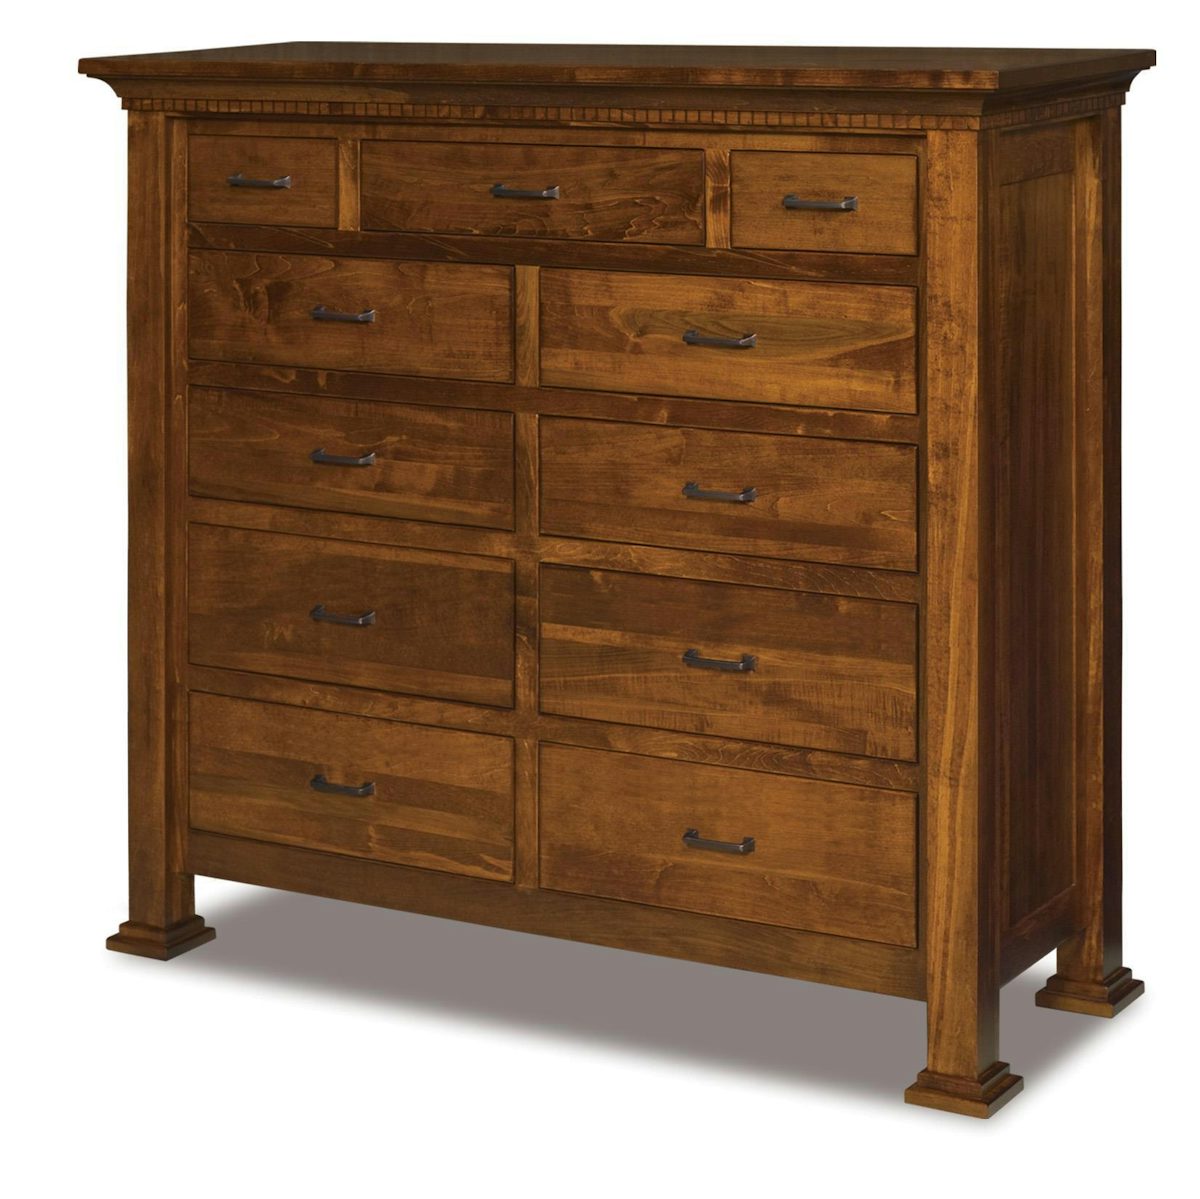 Amish David Eleven Drawer Double Chest of Drawers from DutchCrafters